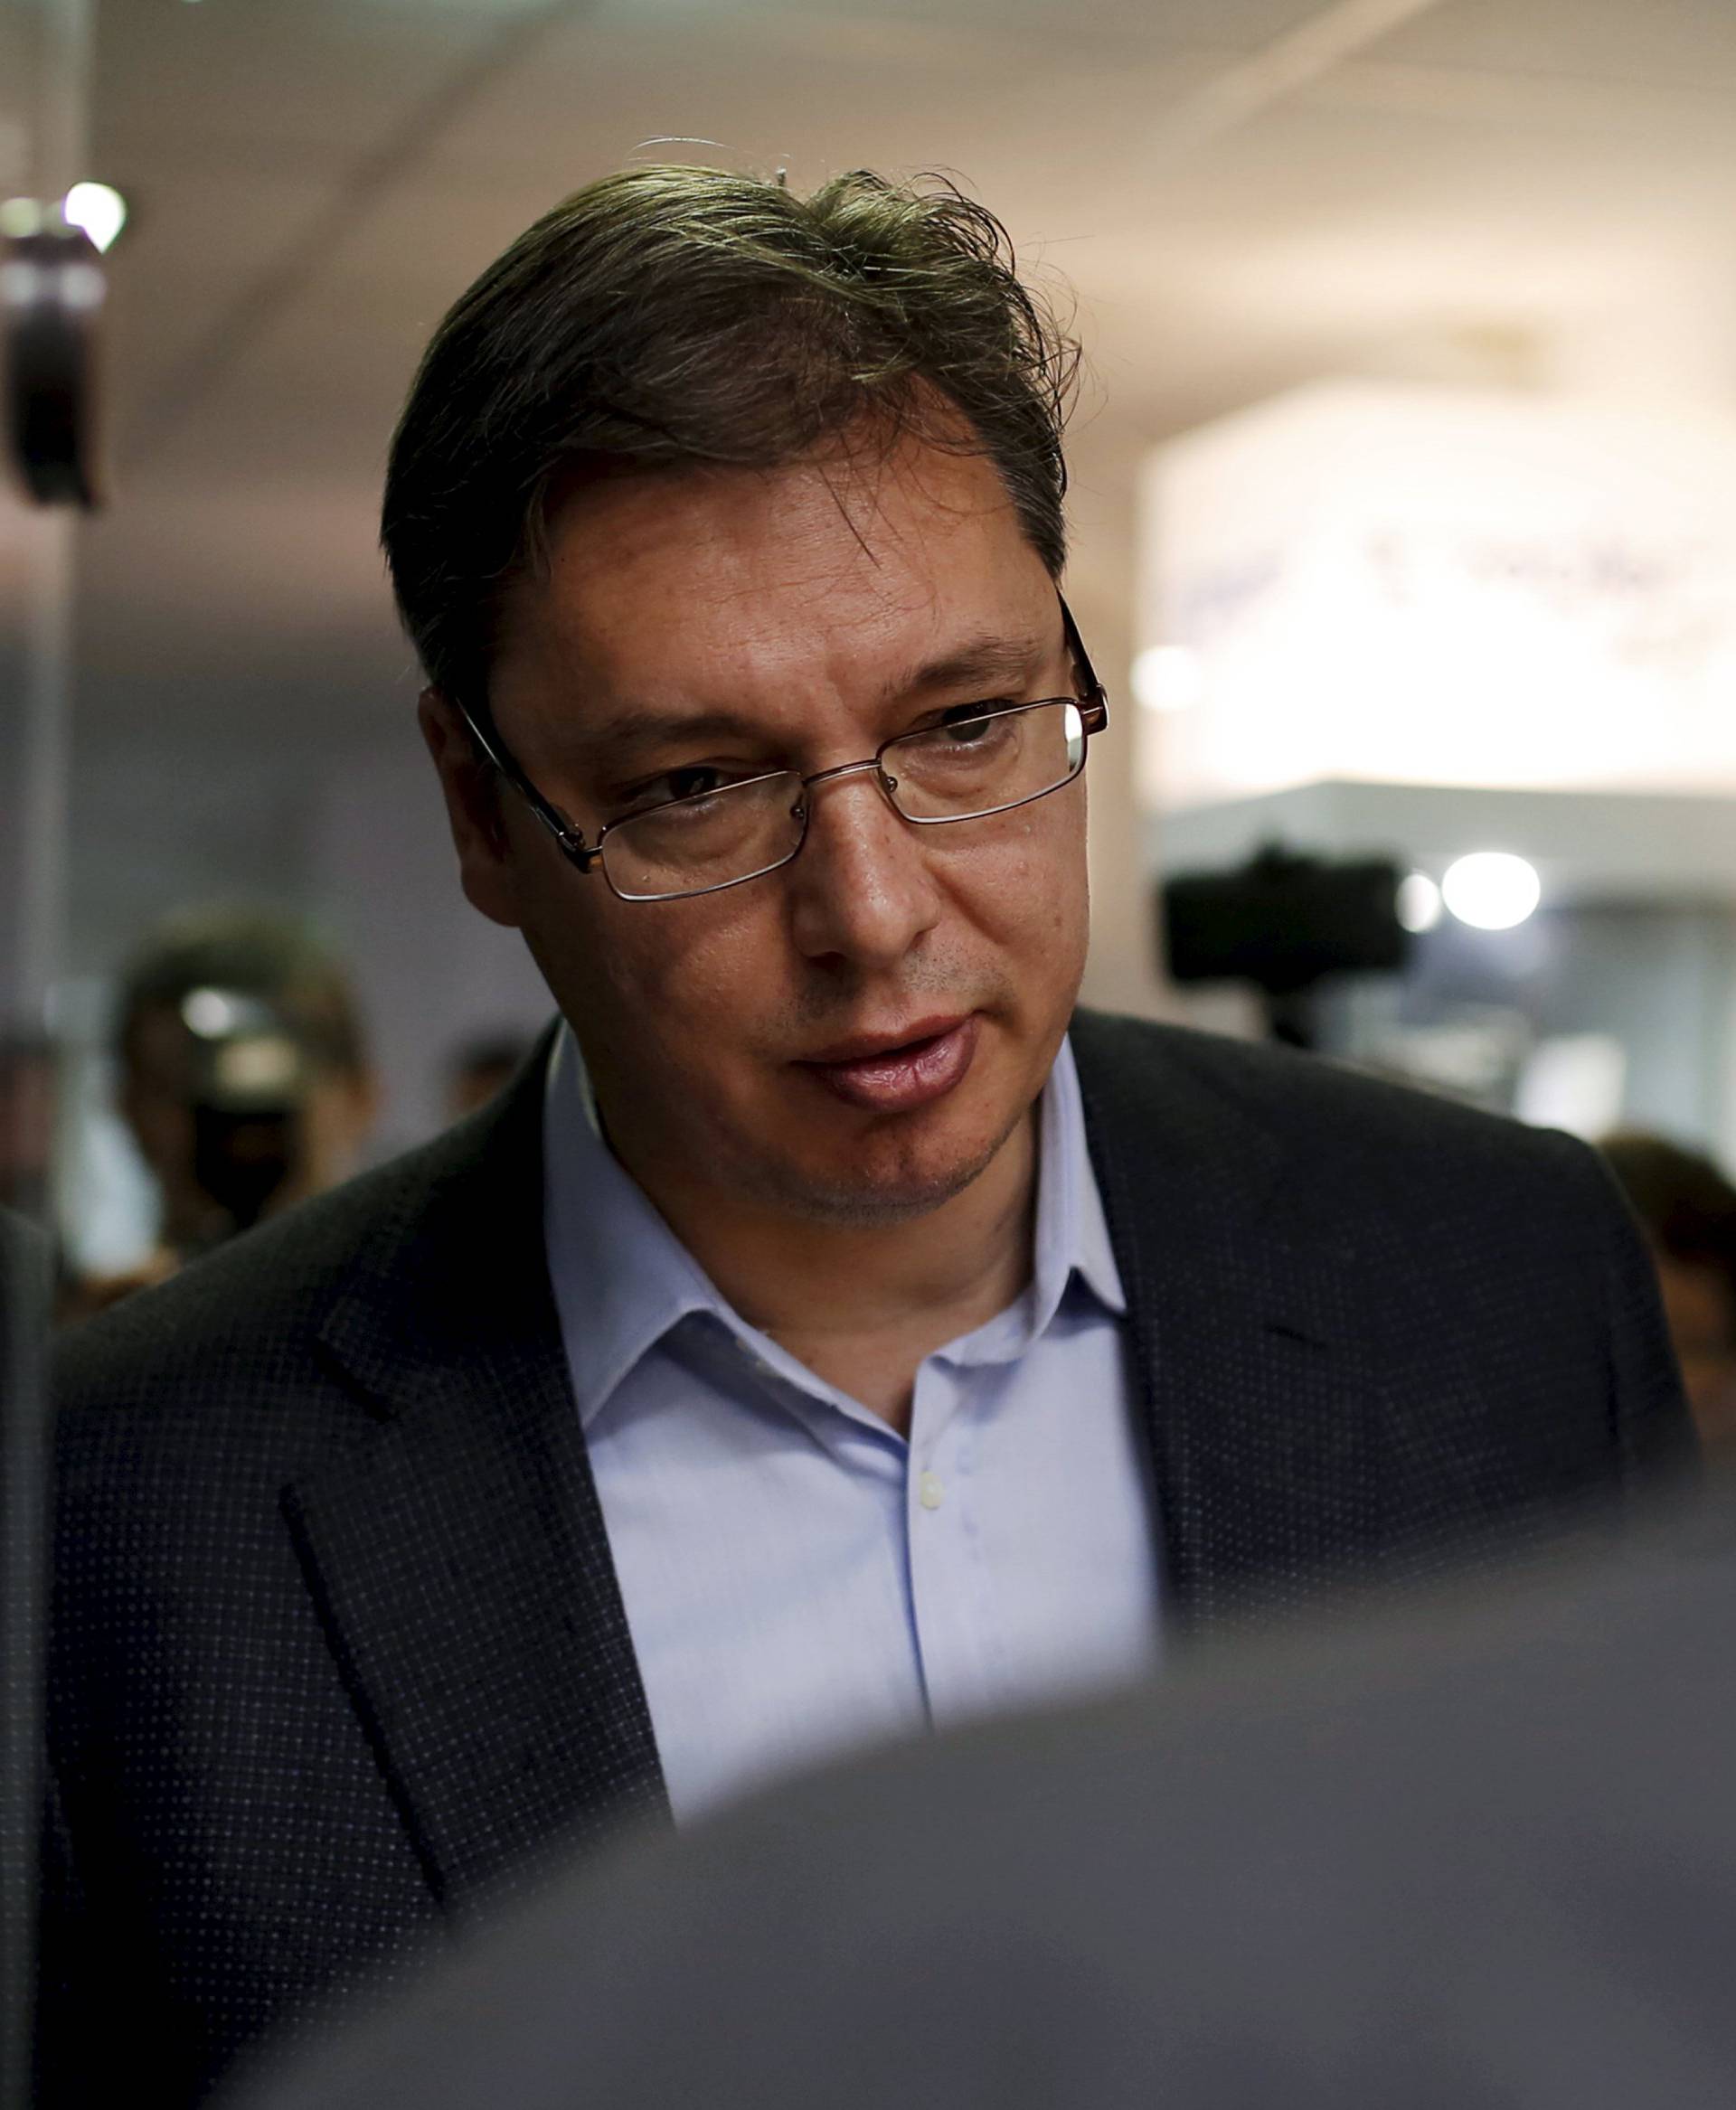 Prime Minister and leader of the Serbian Progressive Party Vucic arrives to cast his ballot in Belgrade